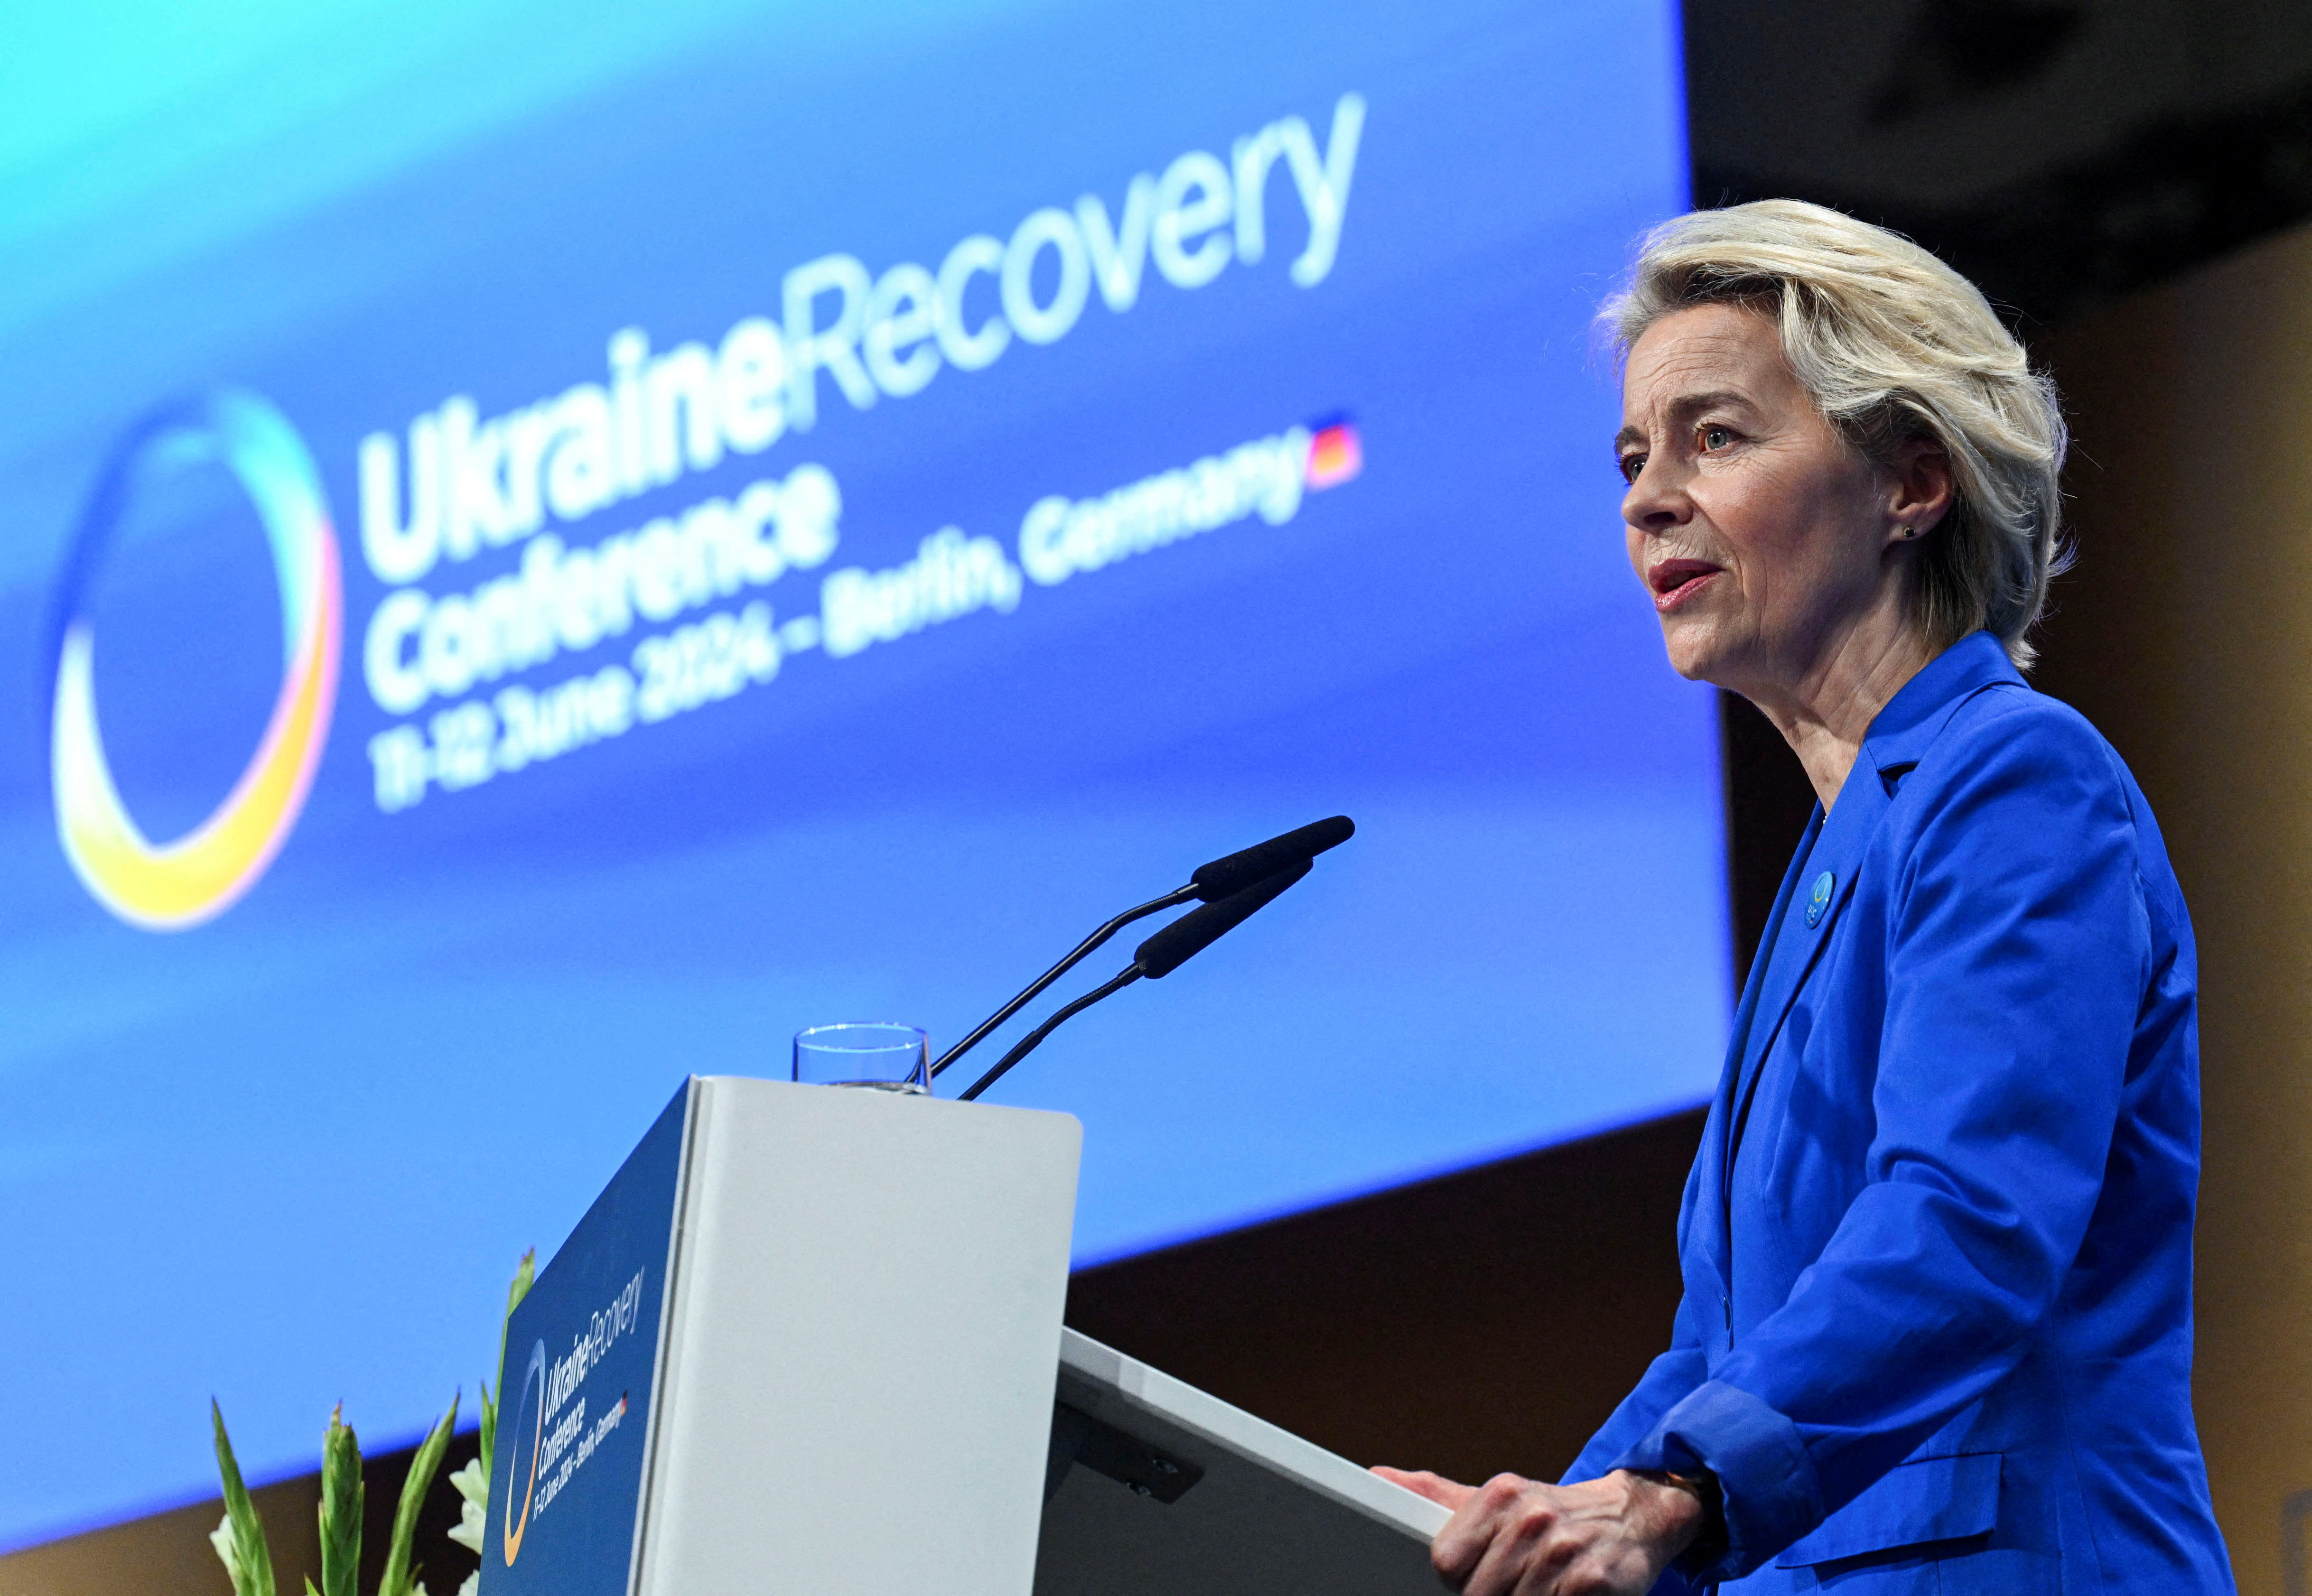 Ukraine Recovery Conference in Berlin